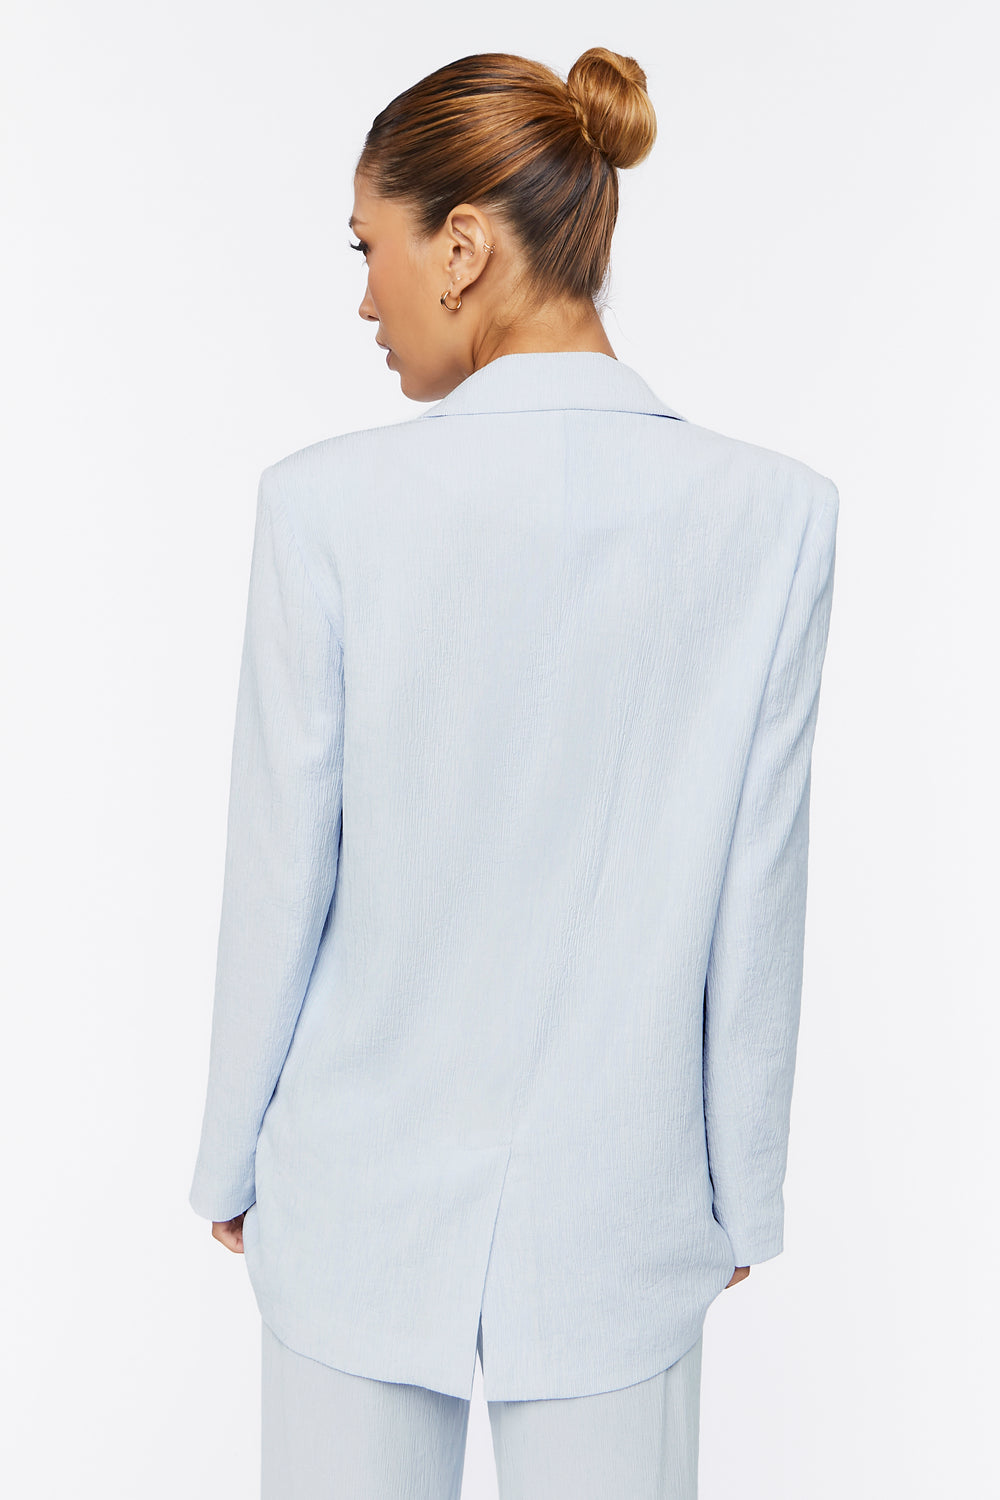 Textured Notched Double-Breasted Blazer Clear